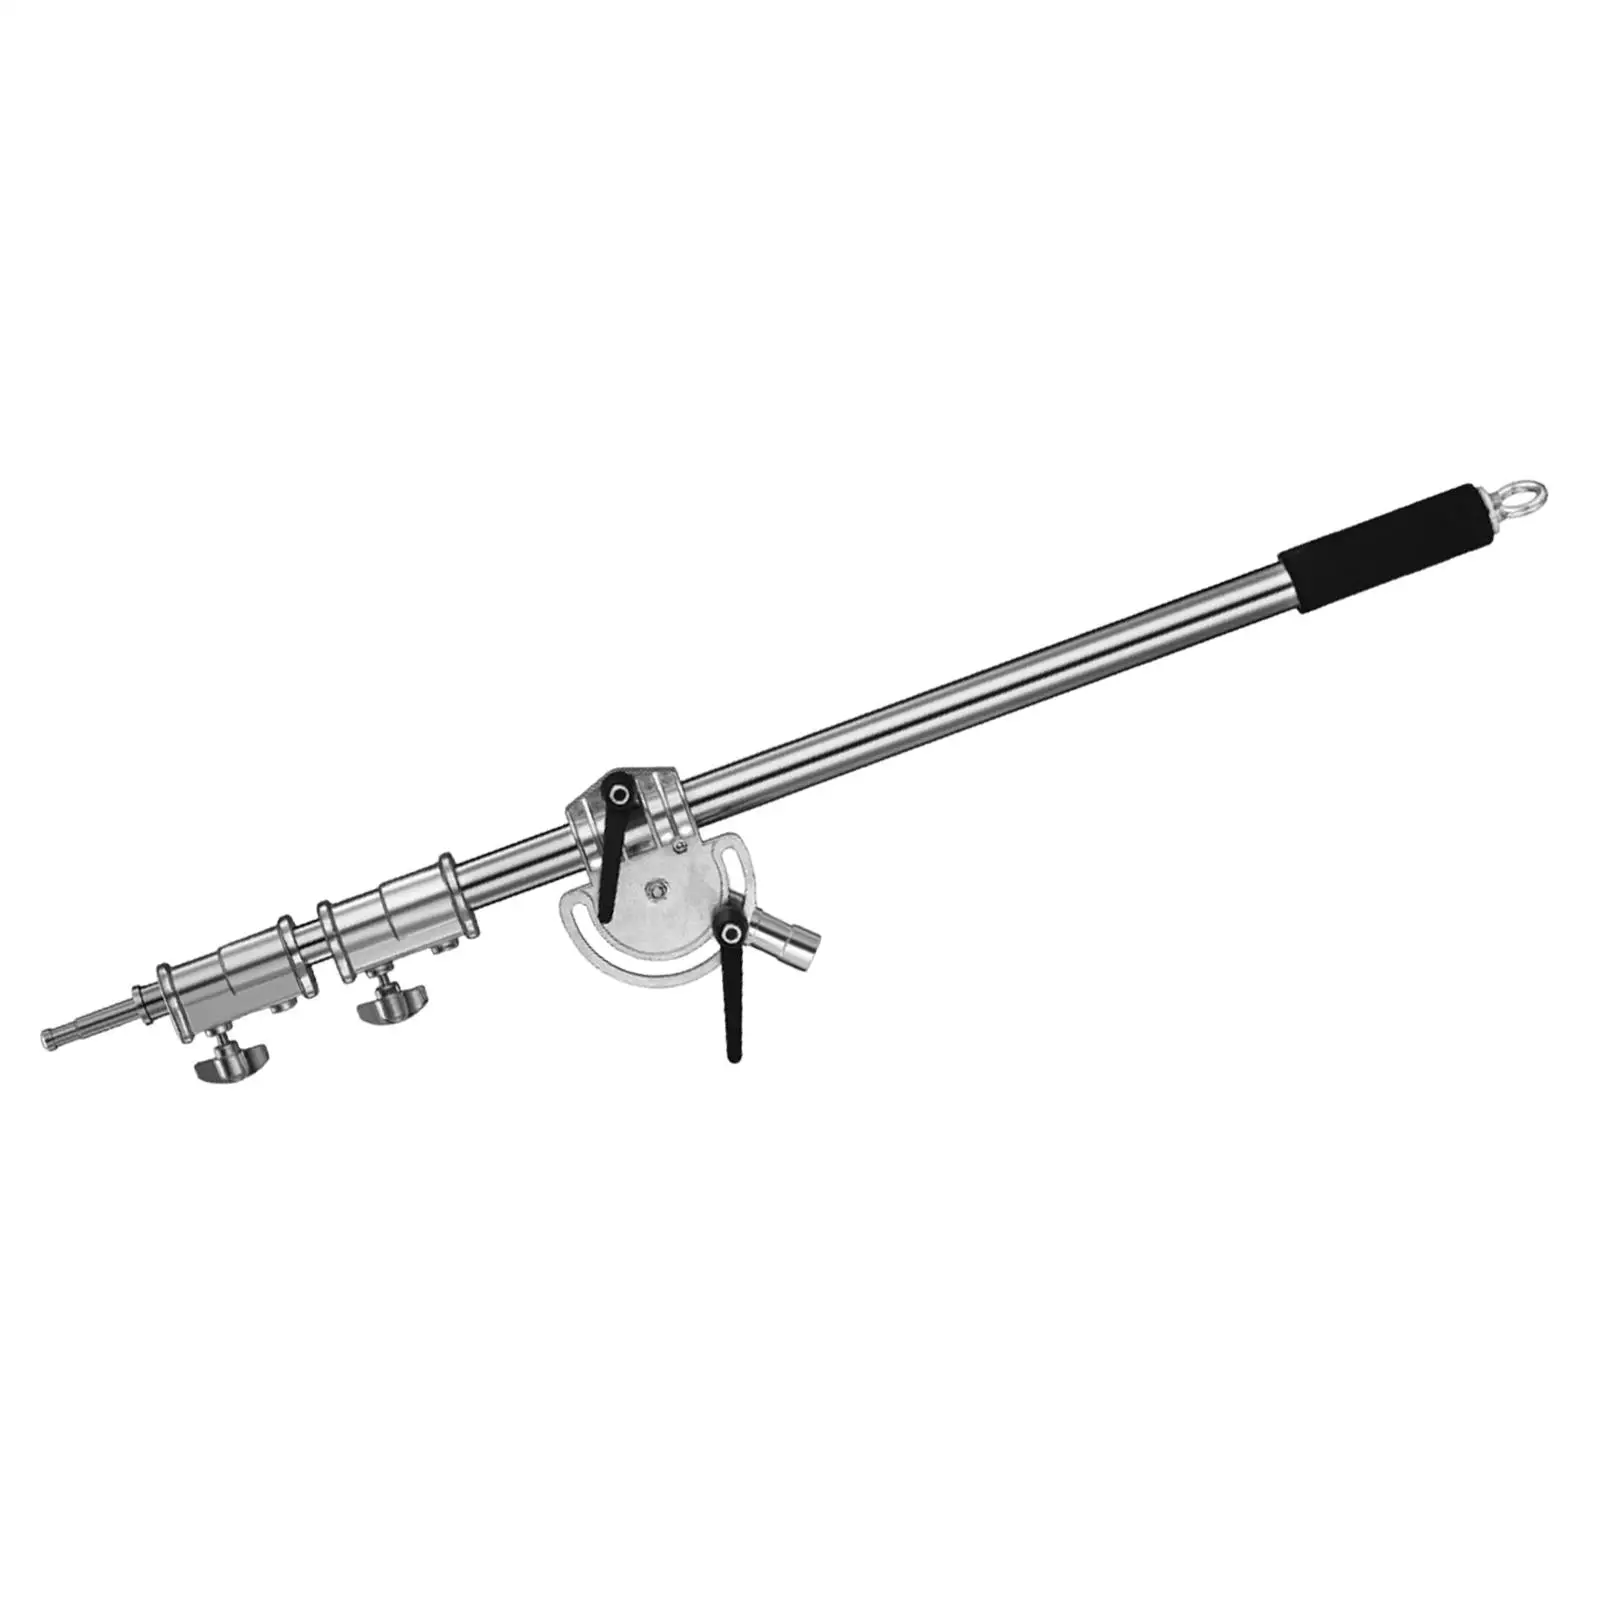 Extendable Photo Studio Boom Arm Length Adjustable Light Stand Long Crossbar Arm for Portrait Photography Weight Sand Bag Strobe